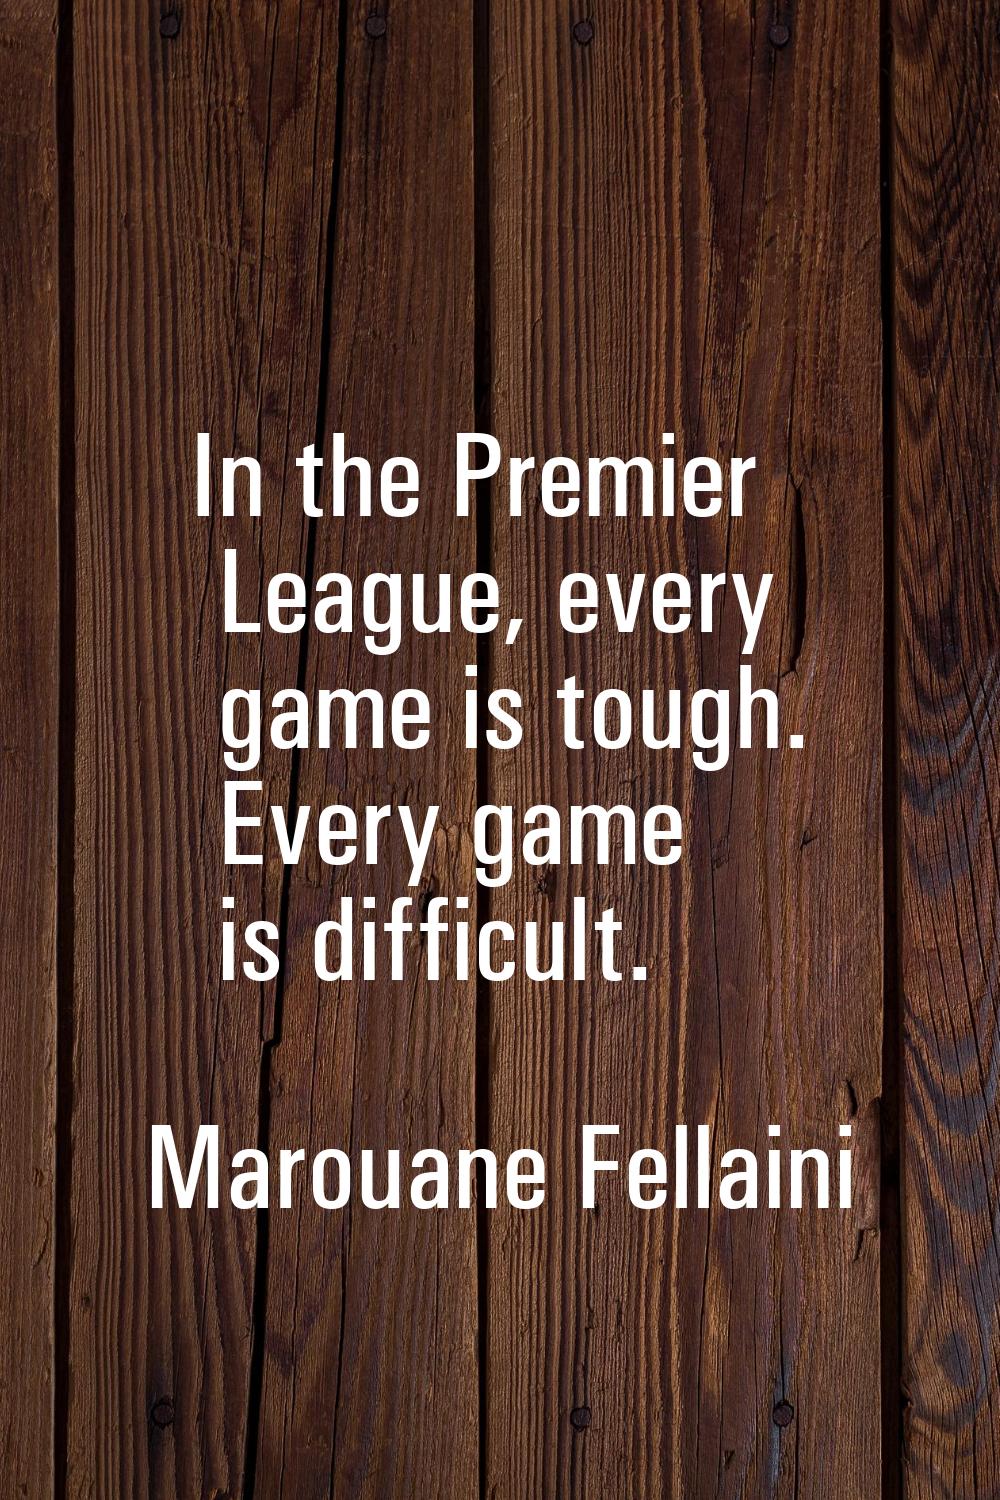 In the Premier League, every game is tough. Every game is difficult.